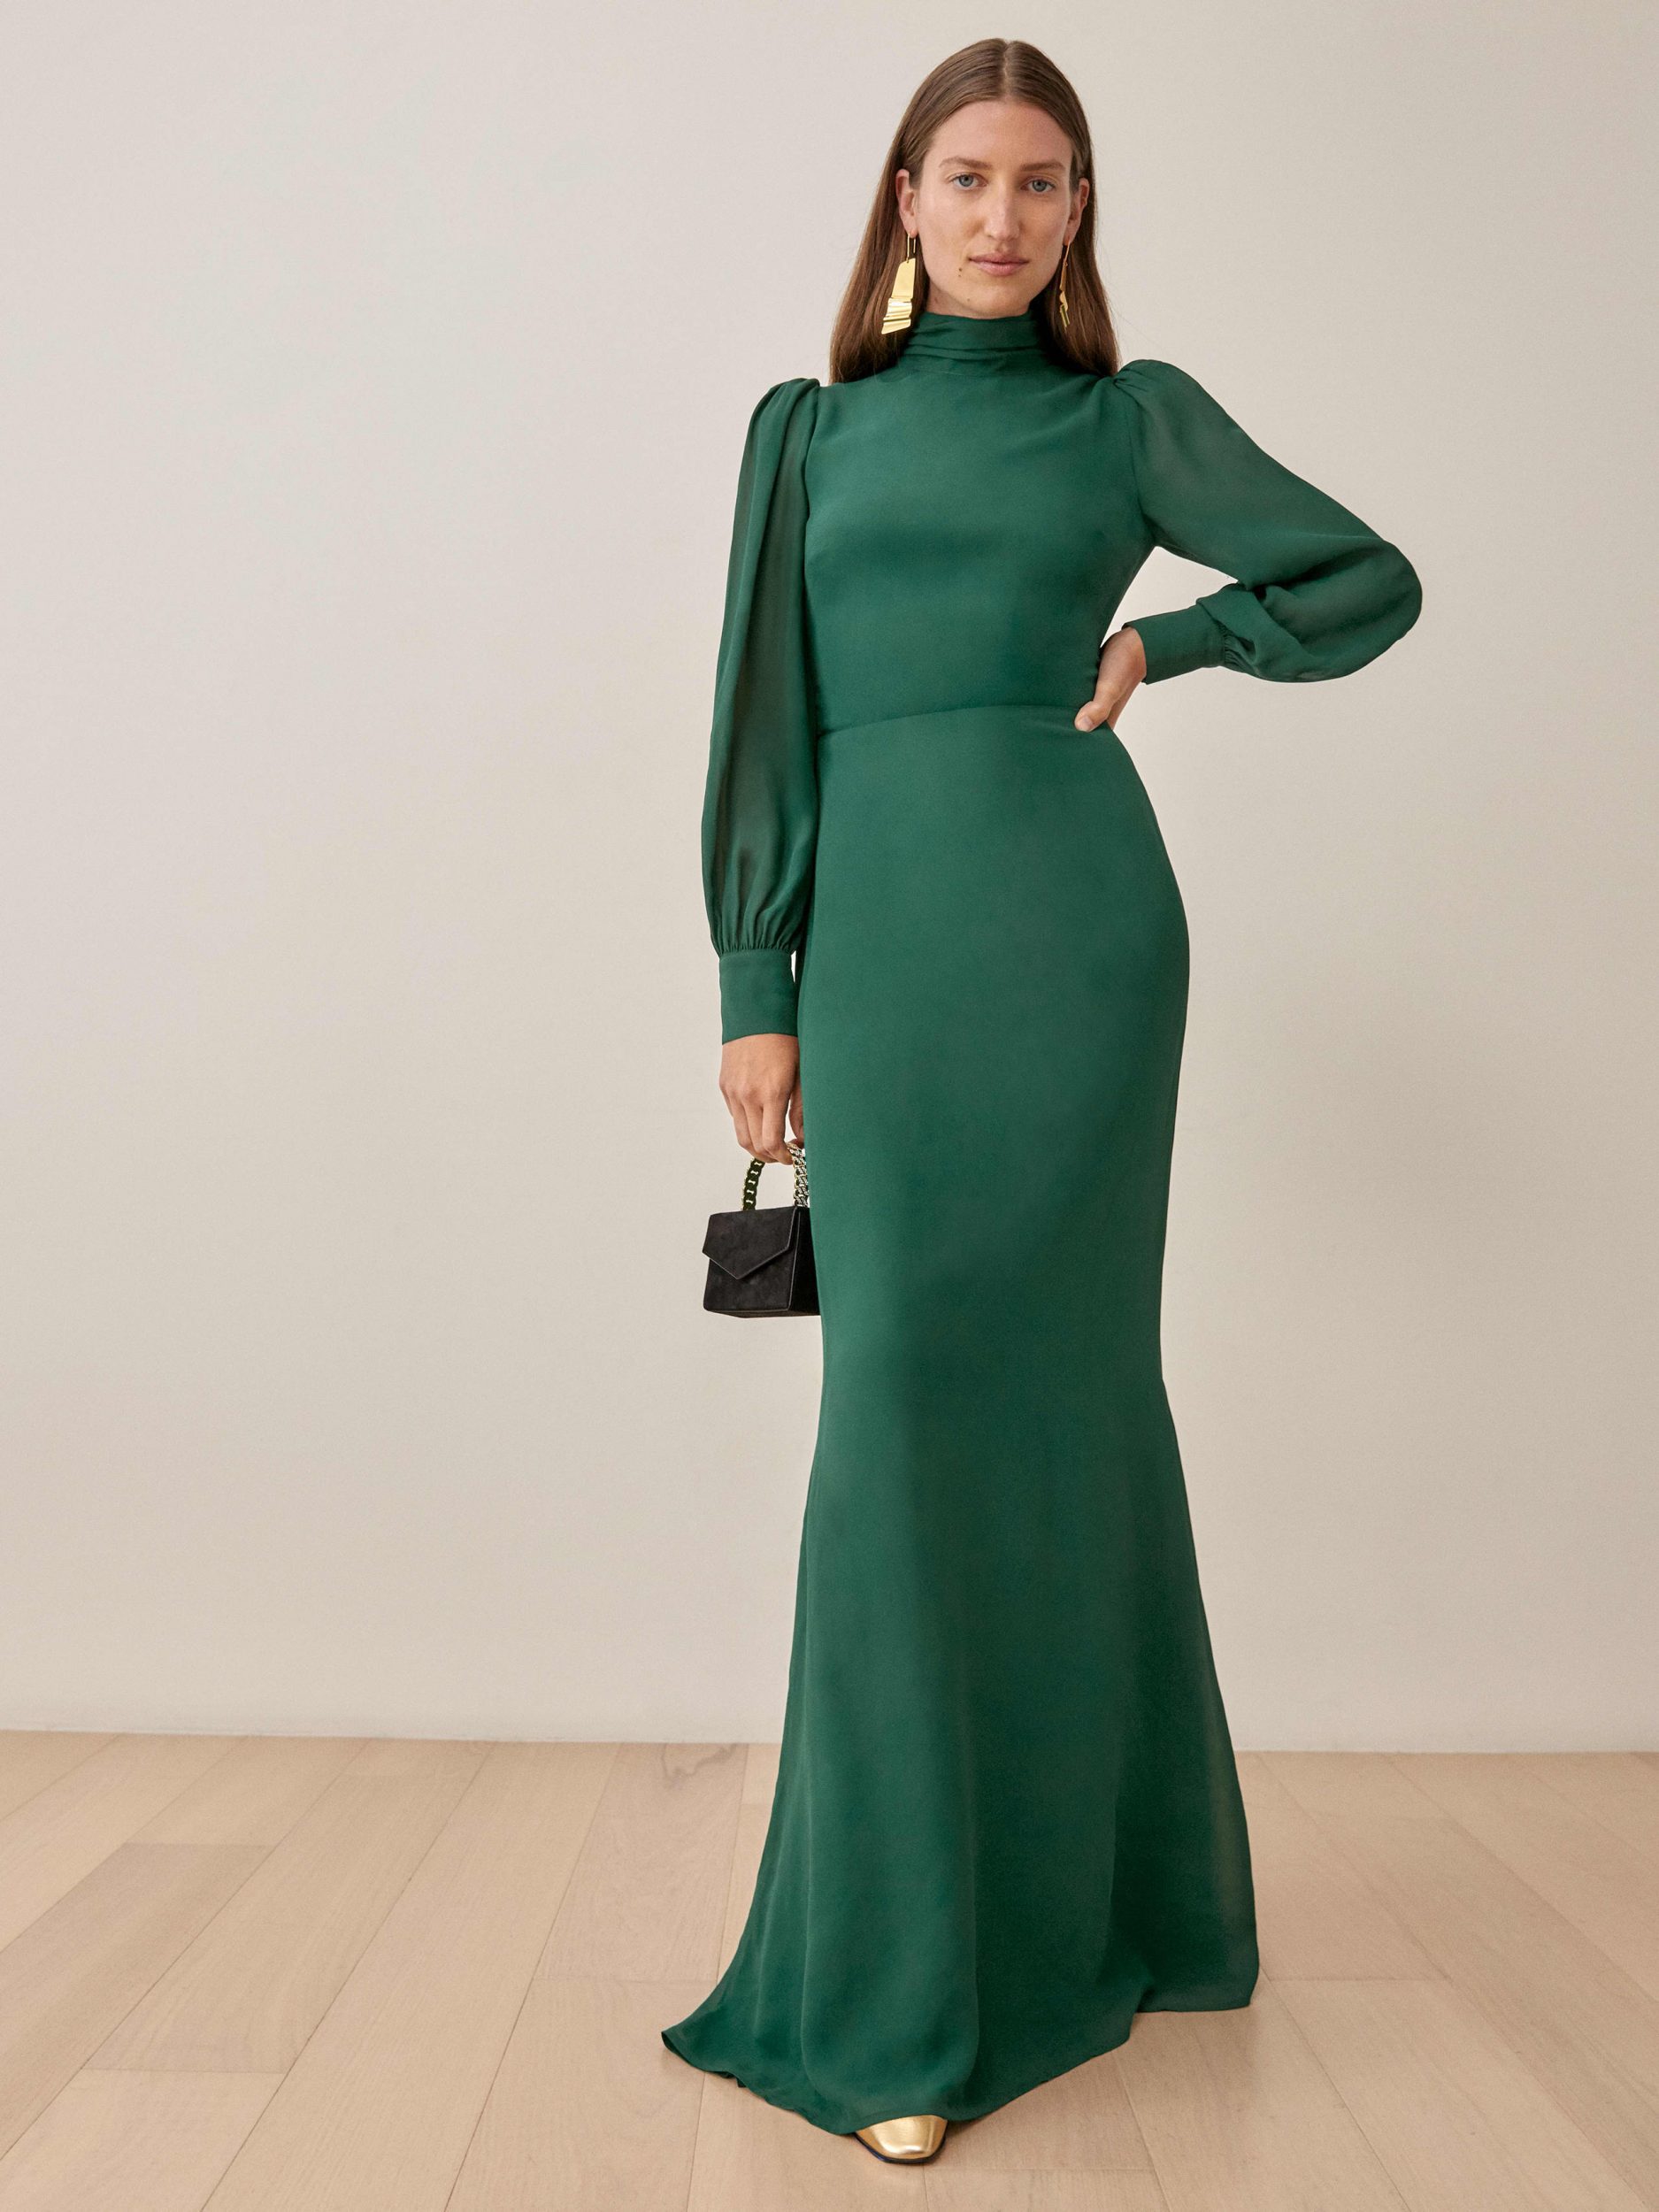 50 Winter Wedding Guest Dresses For 2023 | For Better For Worse